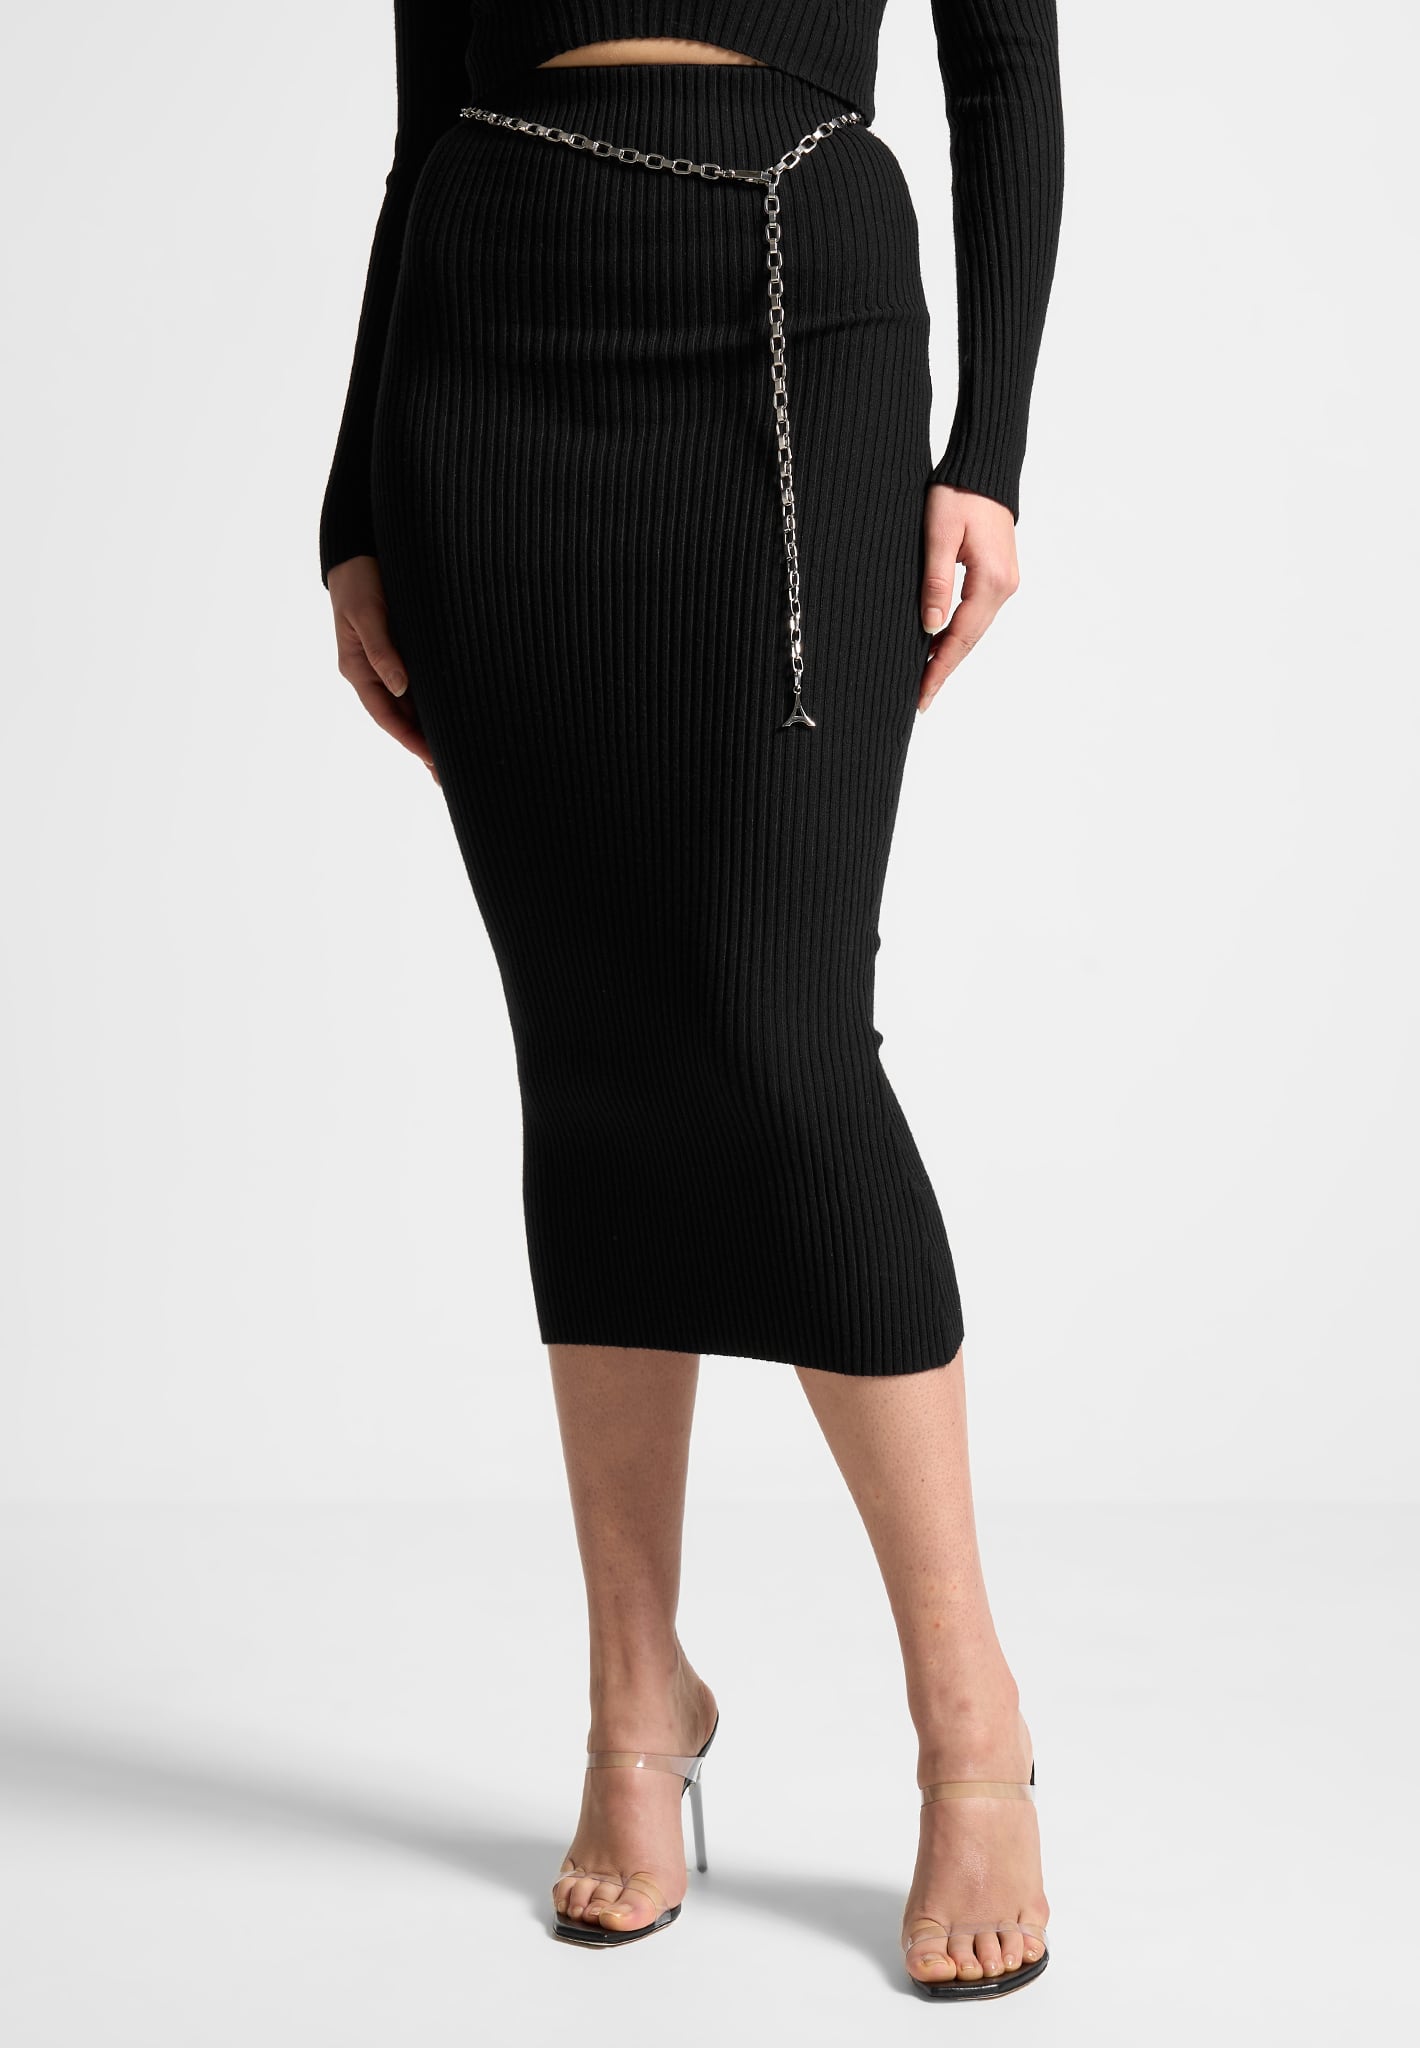 ribbed-knit-midaxi-skirt-with-chain-belt-black